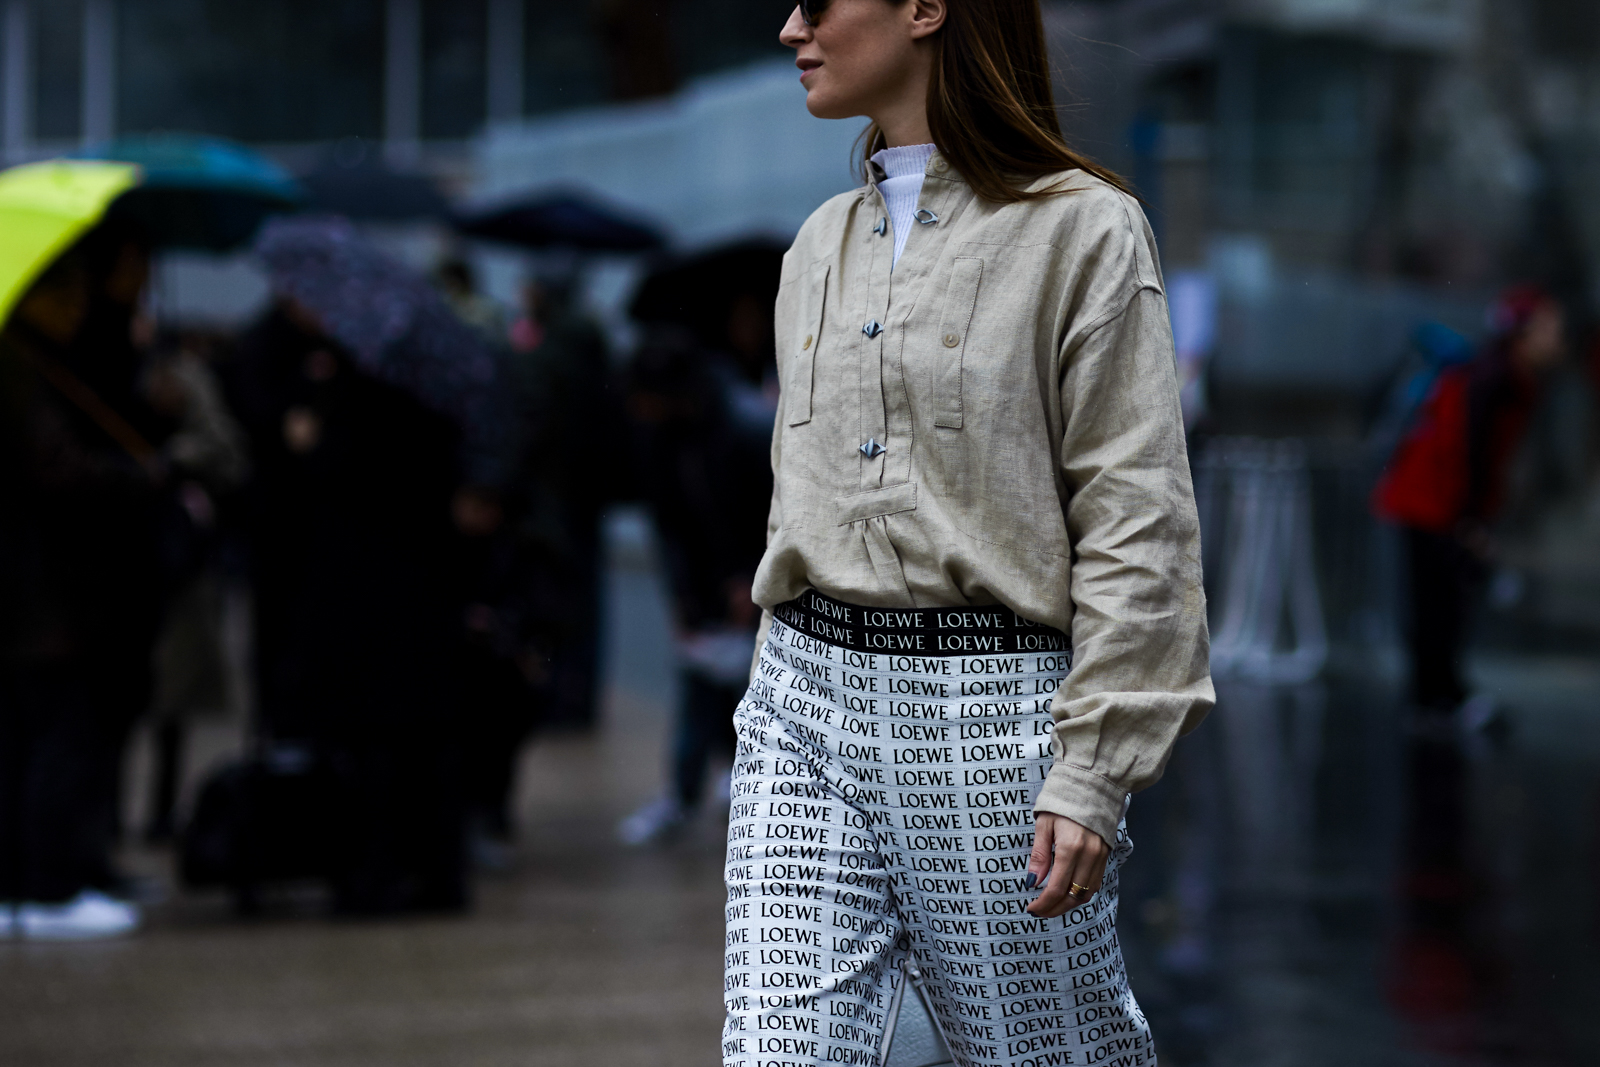 Street Style Photo: Fashion Blogger Gala Gonzalez wearing a Loewe outfit at the Loewe Fall/Winter 2016-2017 fashion show in Paris, France